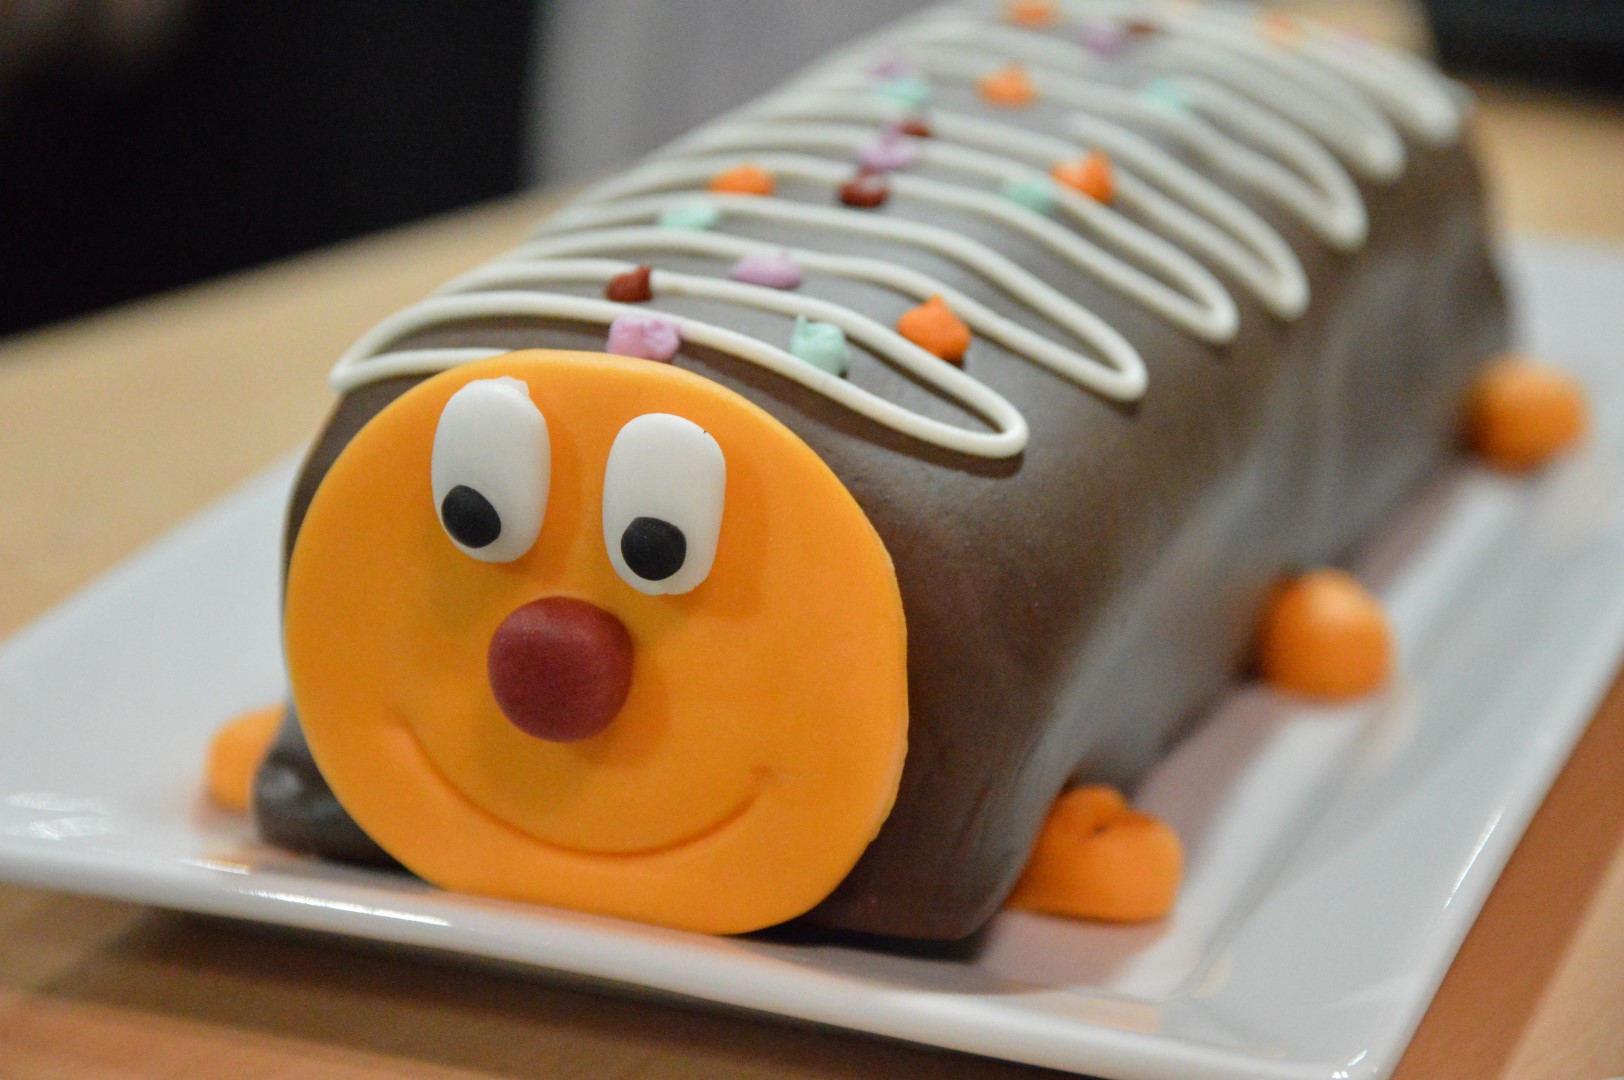 Carl the Caterpillar - a new and improved version of Carl! Now dairy, wheat and gluten free! Delicious chocolate cake that everyone will love! Perfect for childrens parties! www.intolerantgourmand.com